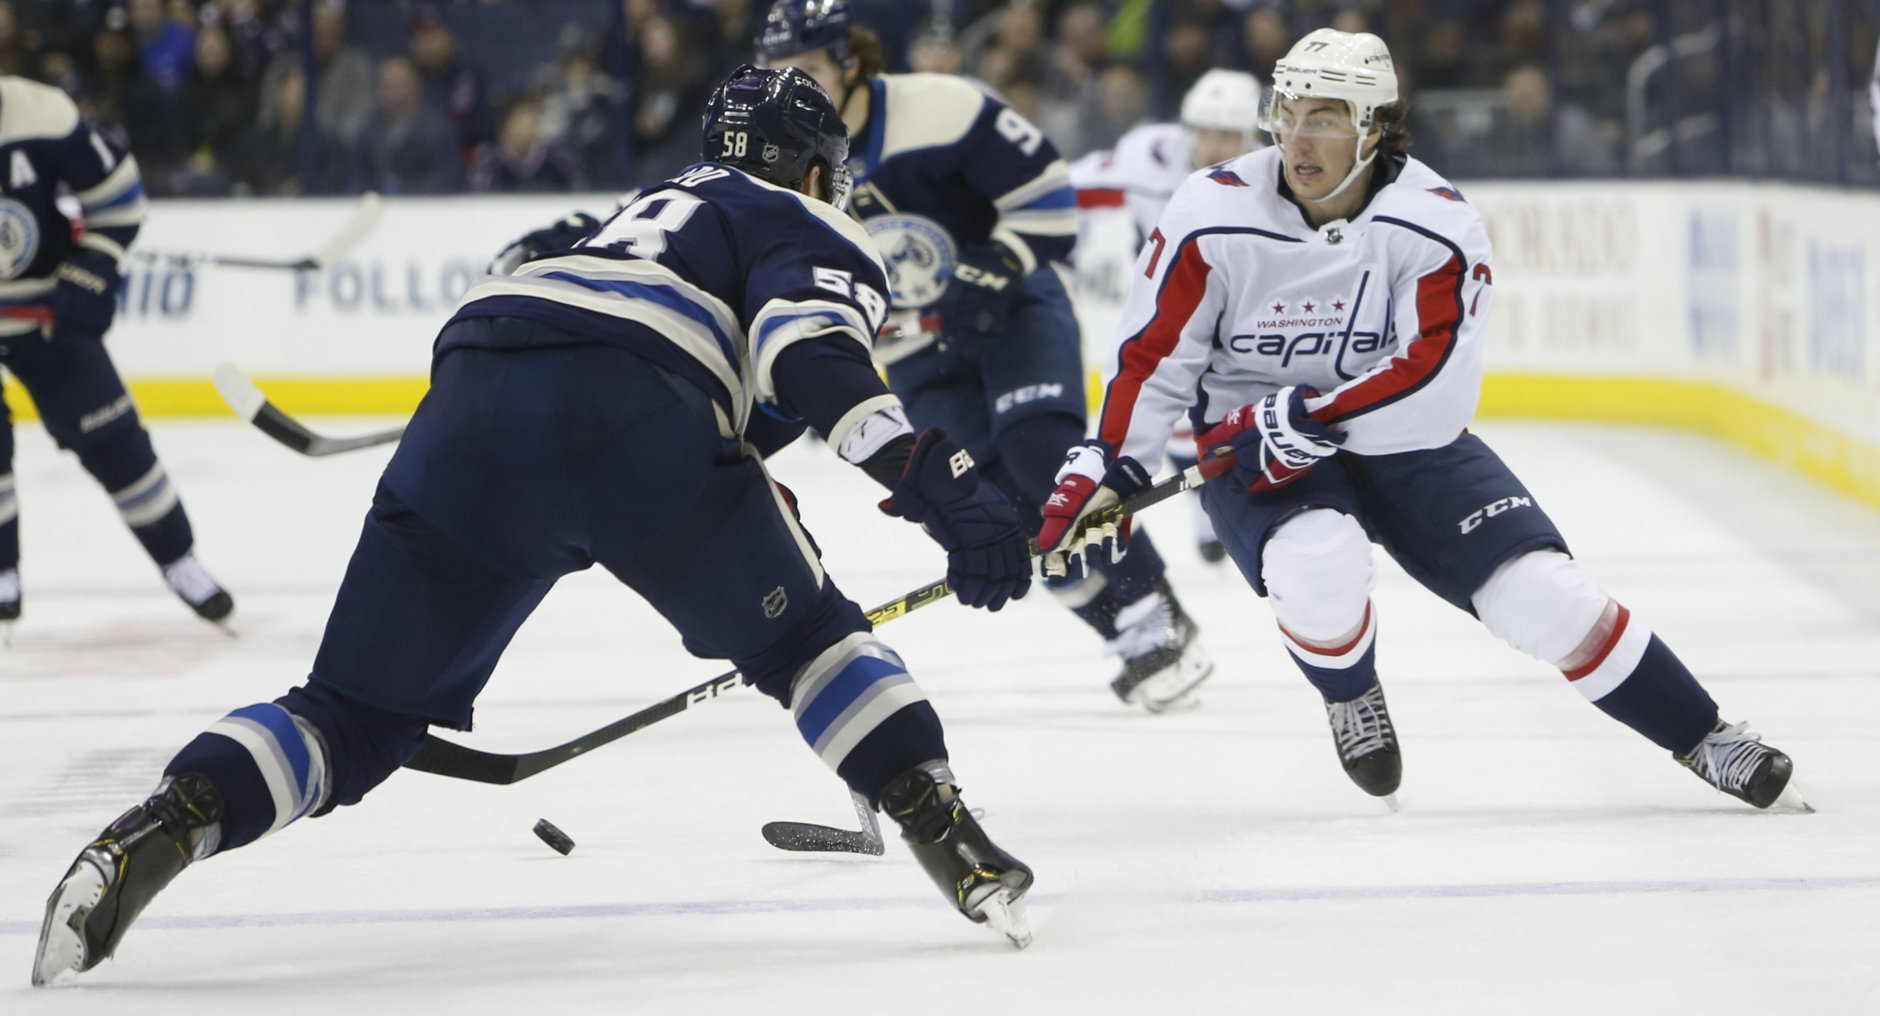 Washington Capitals' T.J. Oshie, right, carries the puck across the blue line as Columbus Blue Jackets' David Savard defends during the third period of an NHL hockey game Tuesday, Feb. 12, 2019, in Columbus, Ohio. The Blue Jackets beat the Capitals 3-0. (AP Photo/Jay LaPrete)